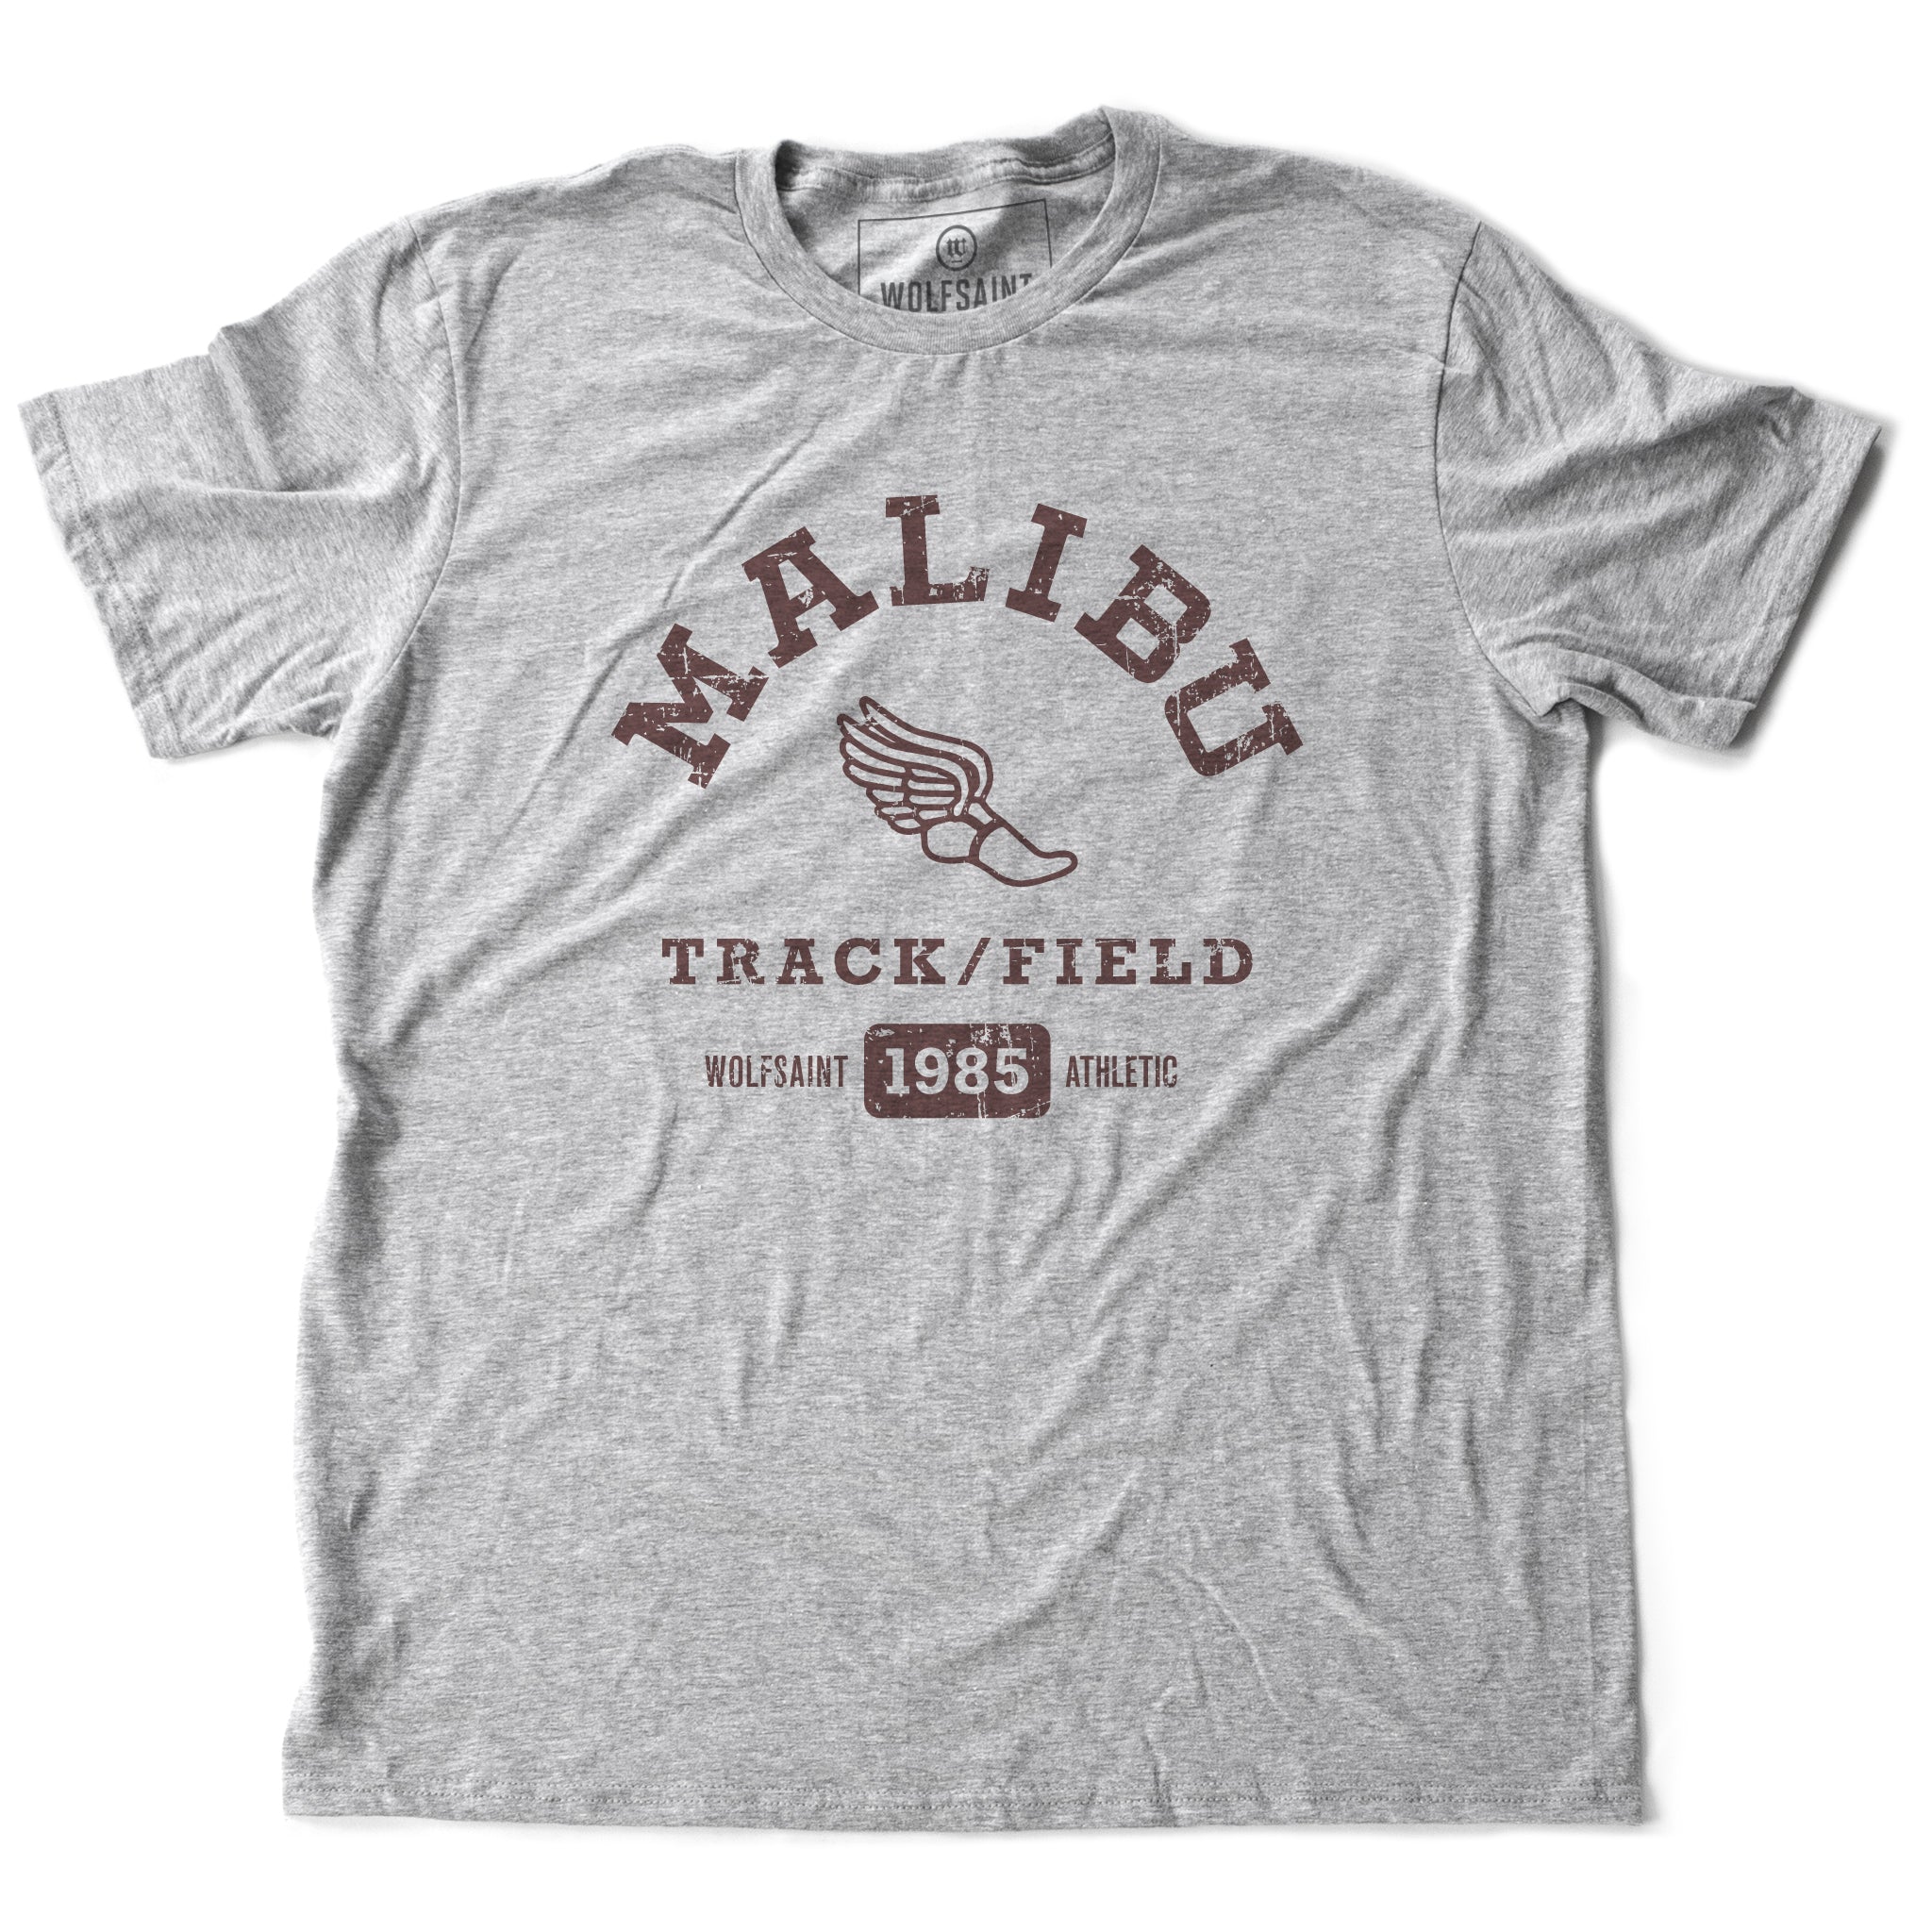 A fashionable, vintage-inspired retro t-shirt in Classic Athletic Heather Gray, featuring a graphic representing a sarcastic and fictitious Malibu (California) Track and Field team. From wolfsaint.net